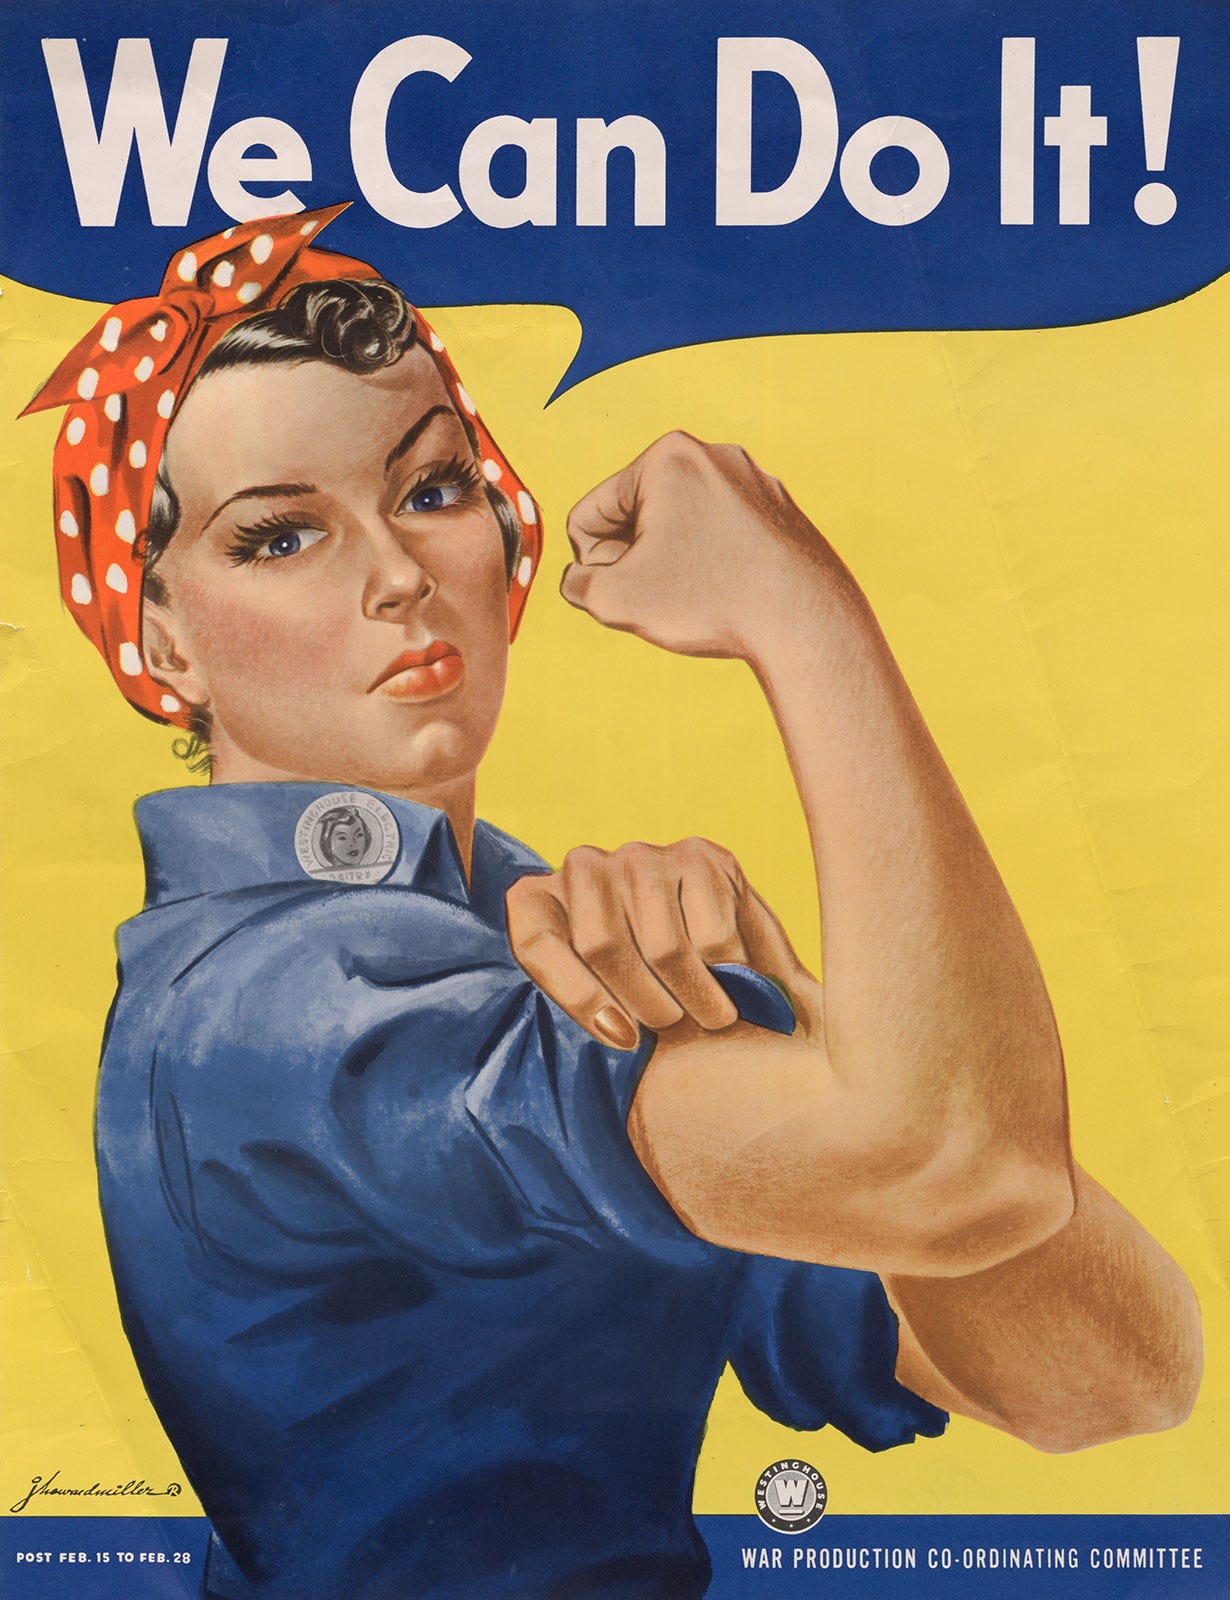 Rosie the Riveter | Definition, Poster, &amp; Facts | Britannica